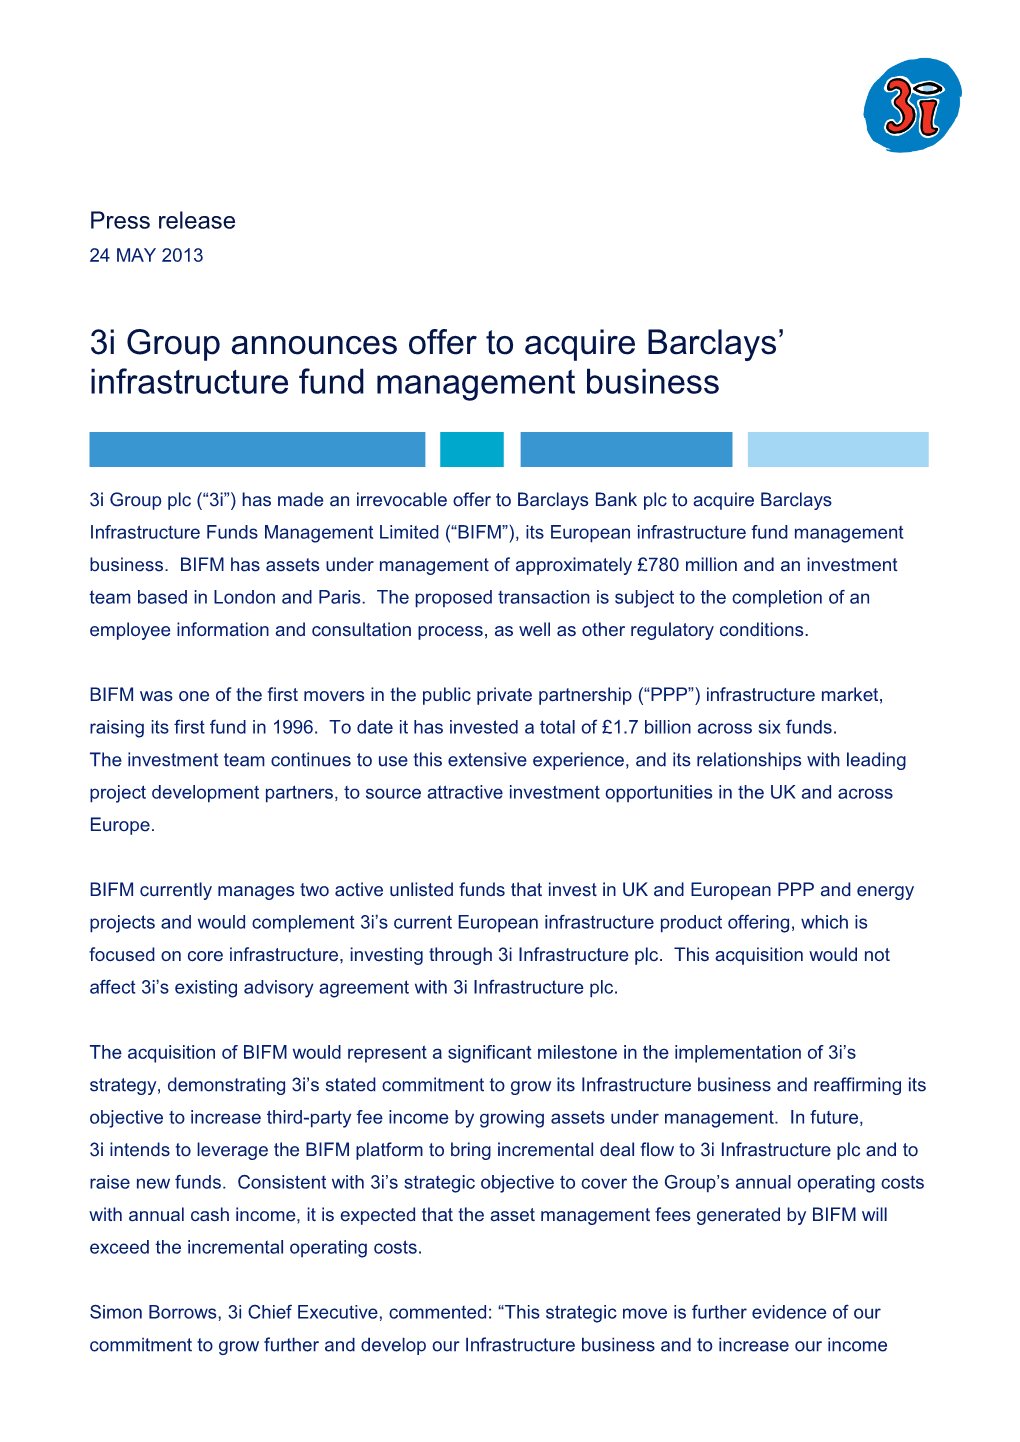 3I Group Announces Offer to Acquire Barclays' Infrastructure Fund